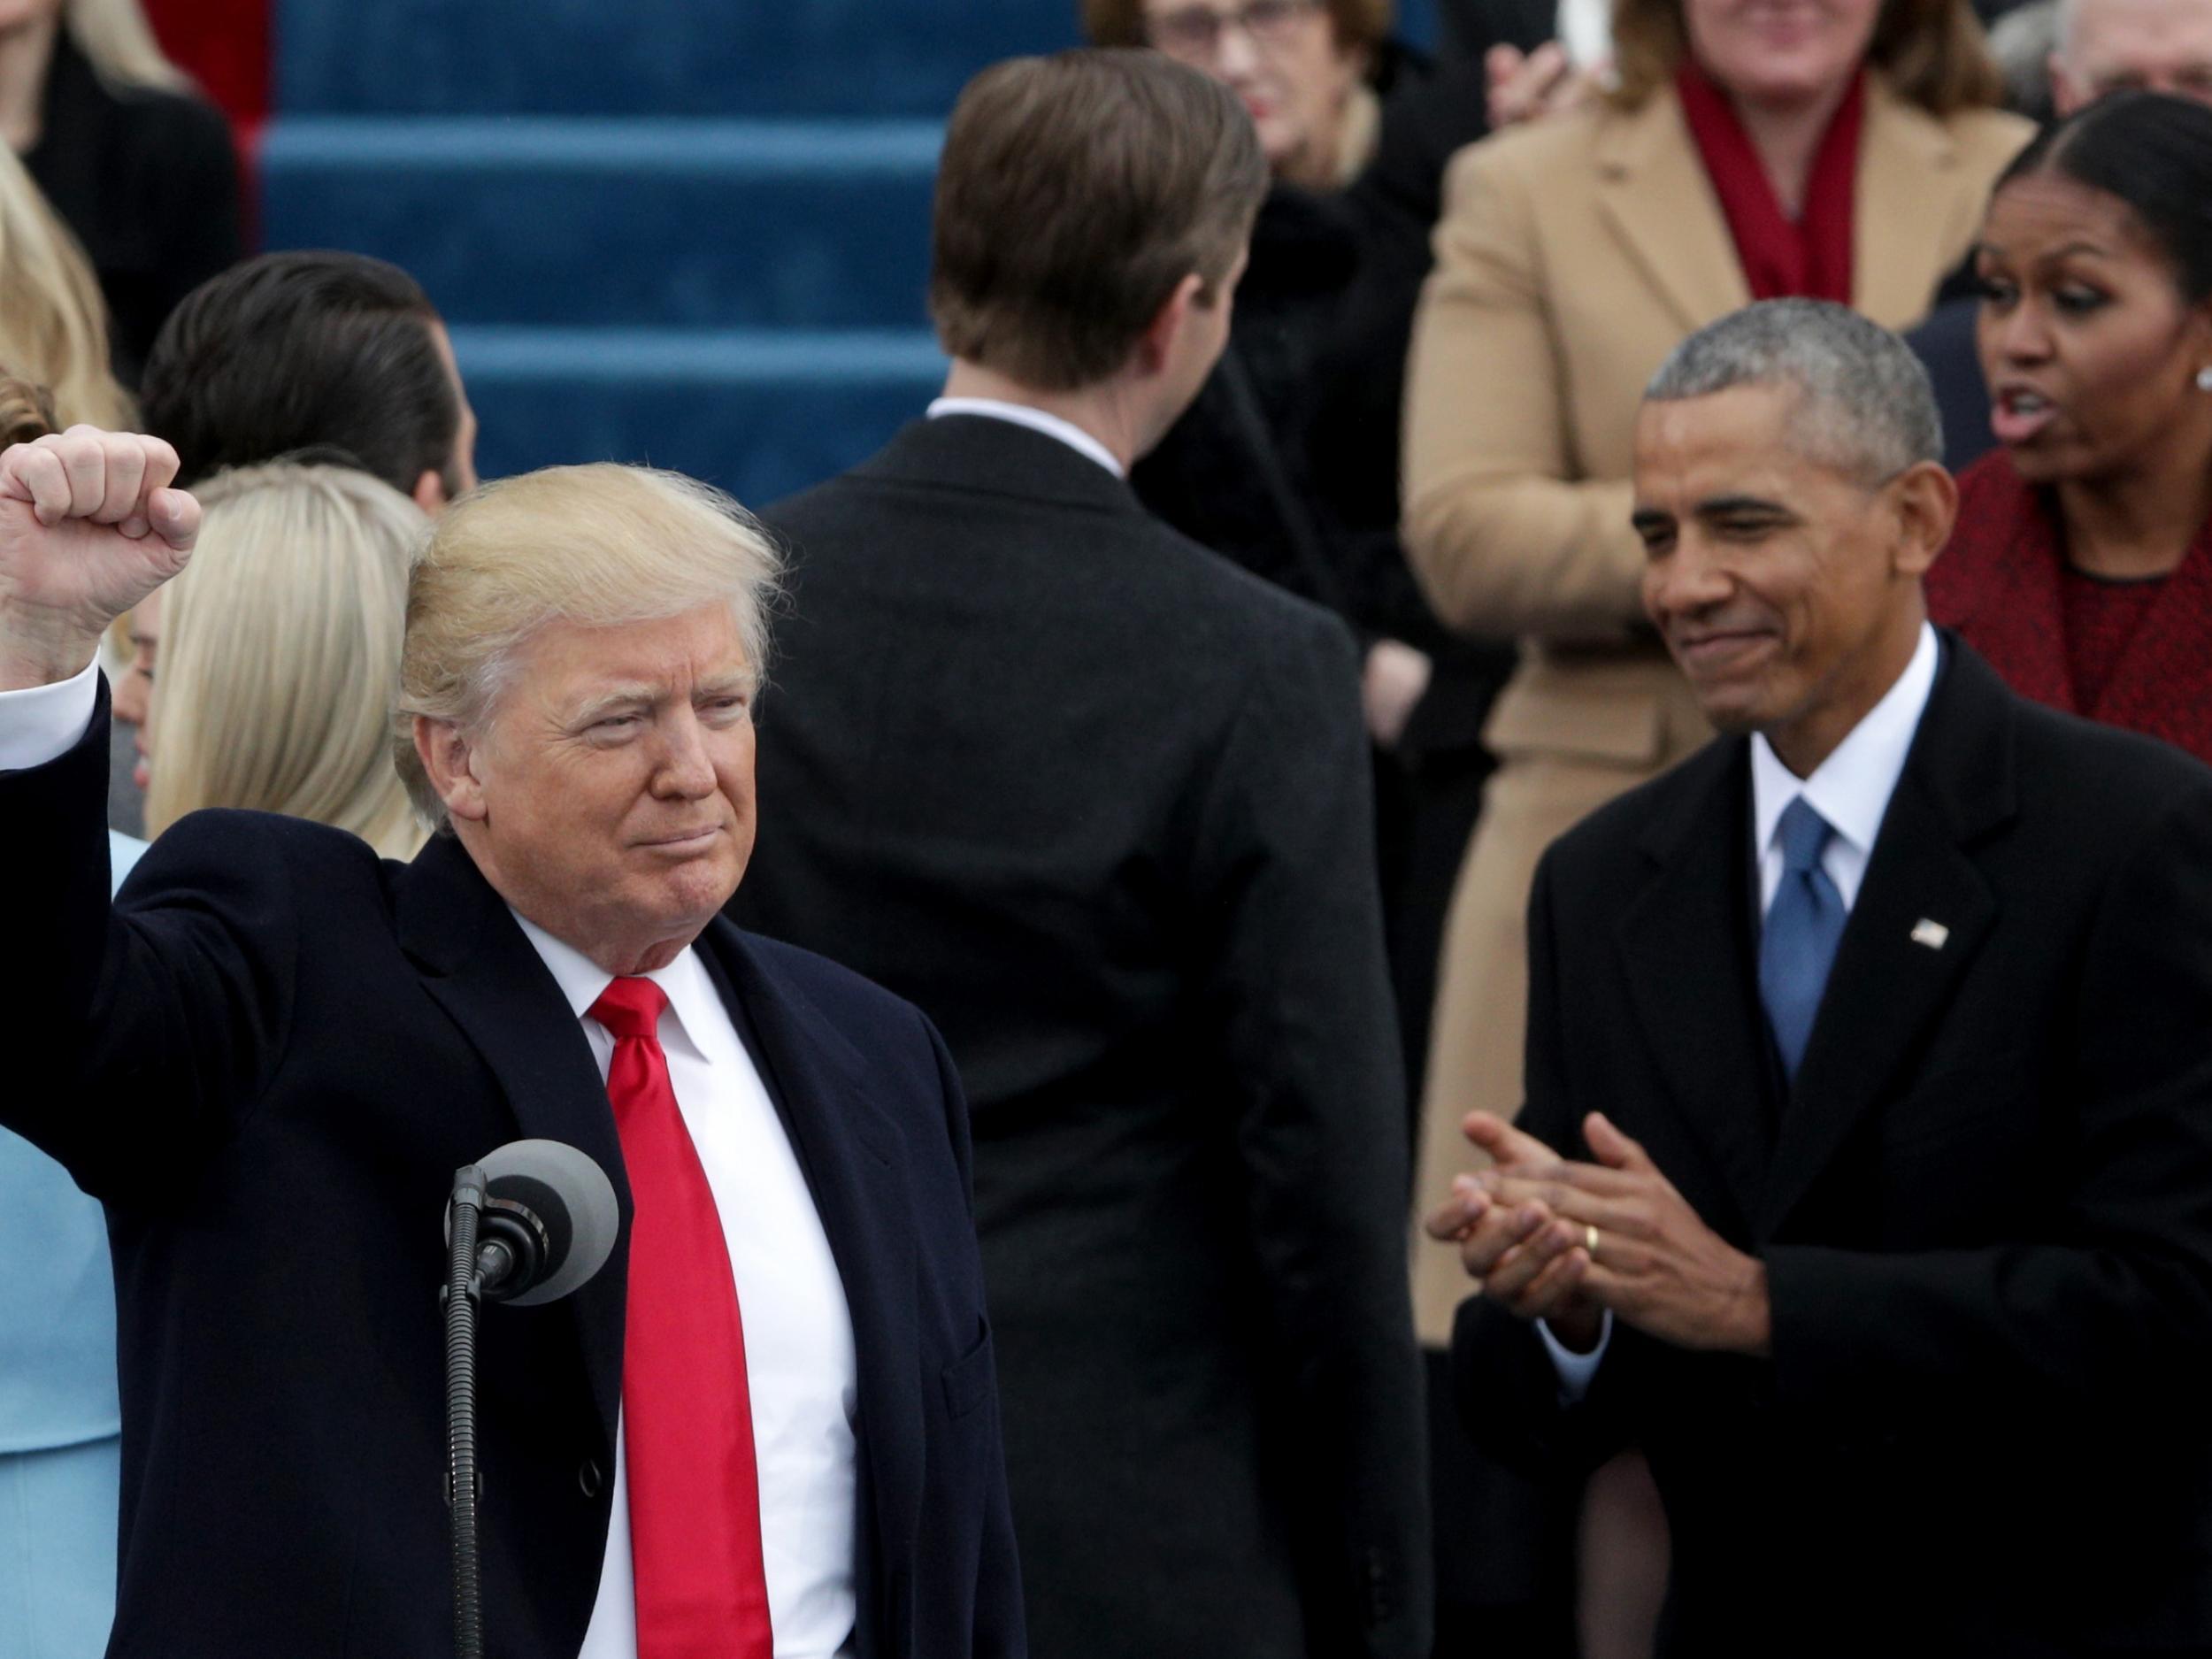 Donald Trump and Barack Obama on Inauguration Day in January